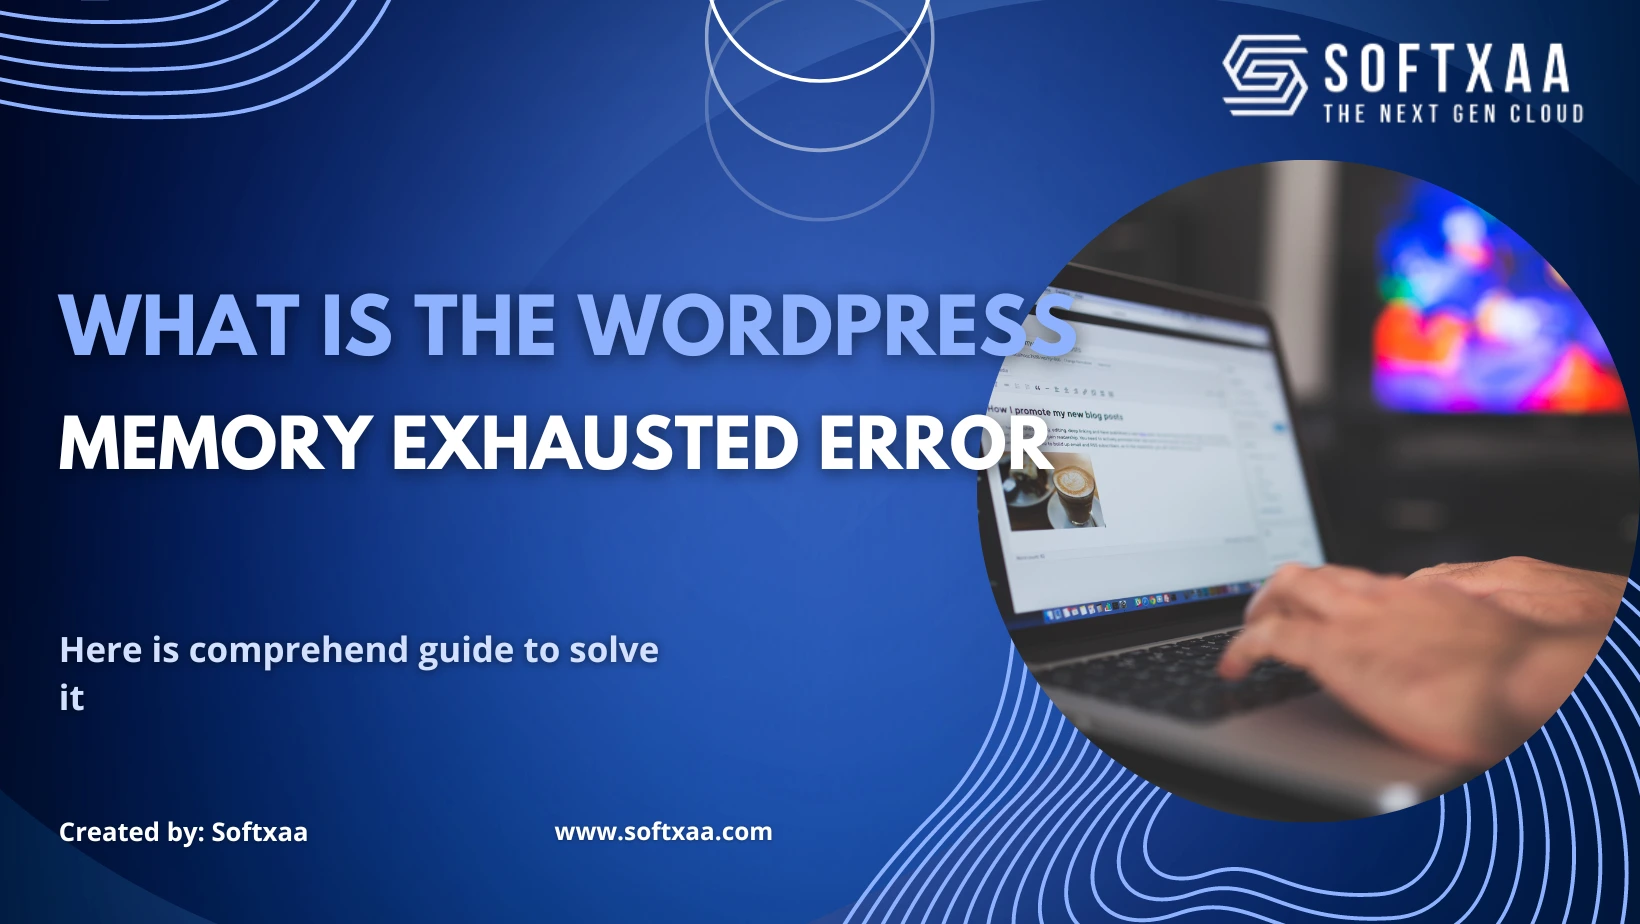 What is the WordPress Memory Exhausted Error?